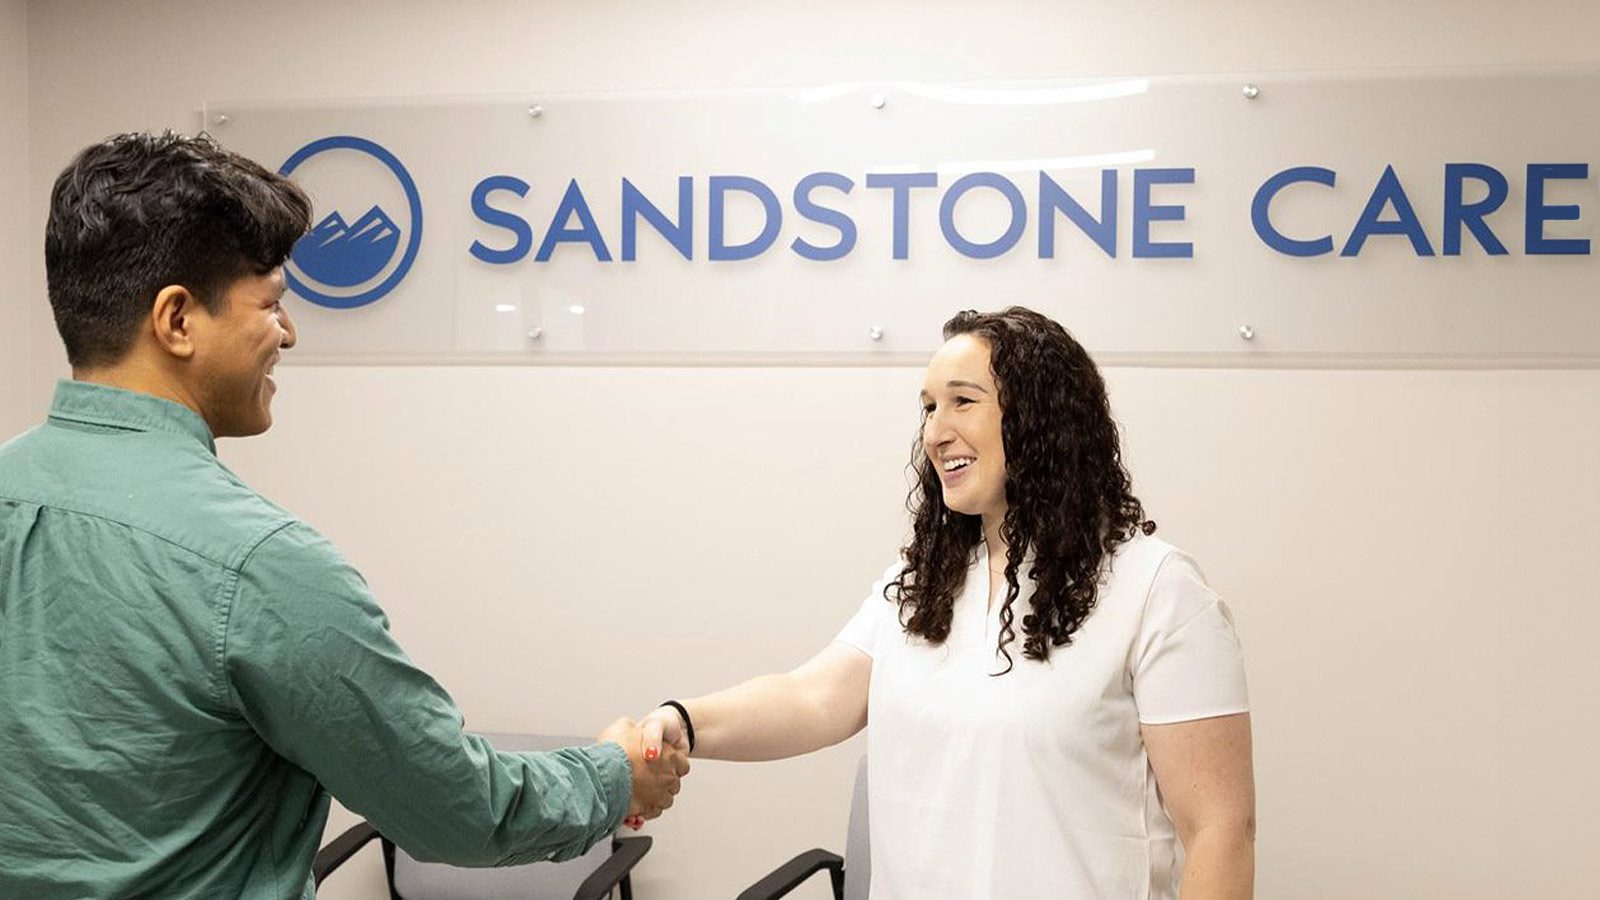 Two people smiling and shaking hands in an office with a blue Sandstone Care logo in the background.